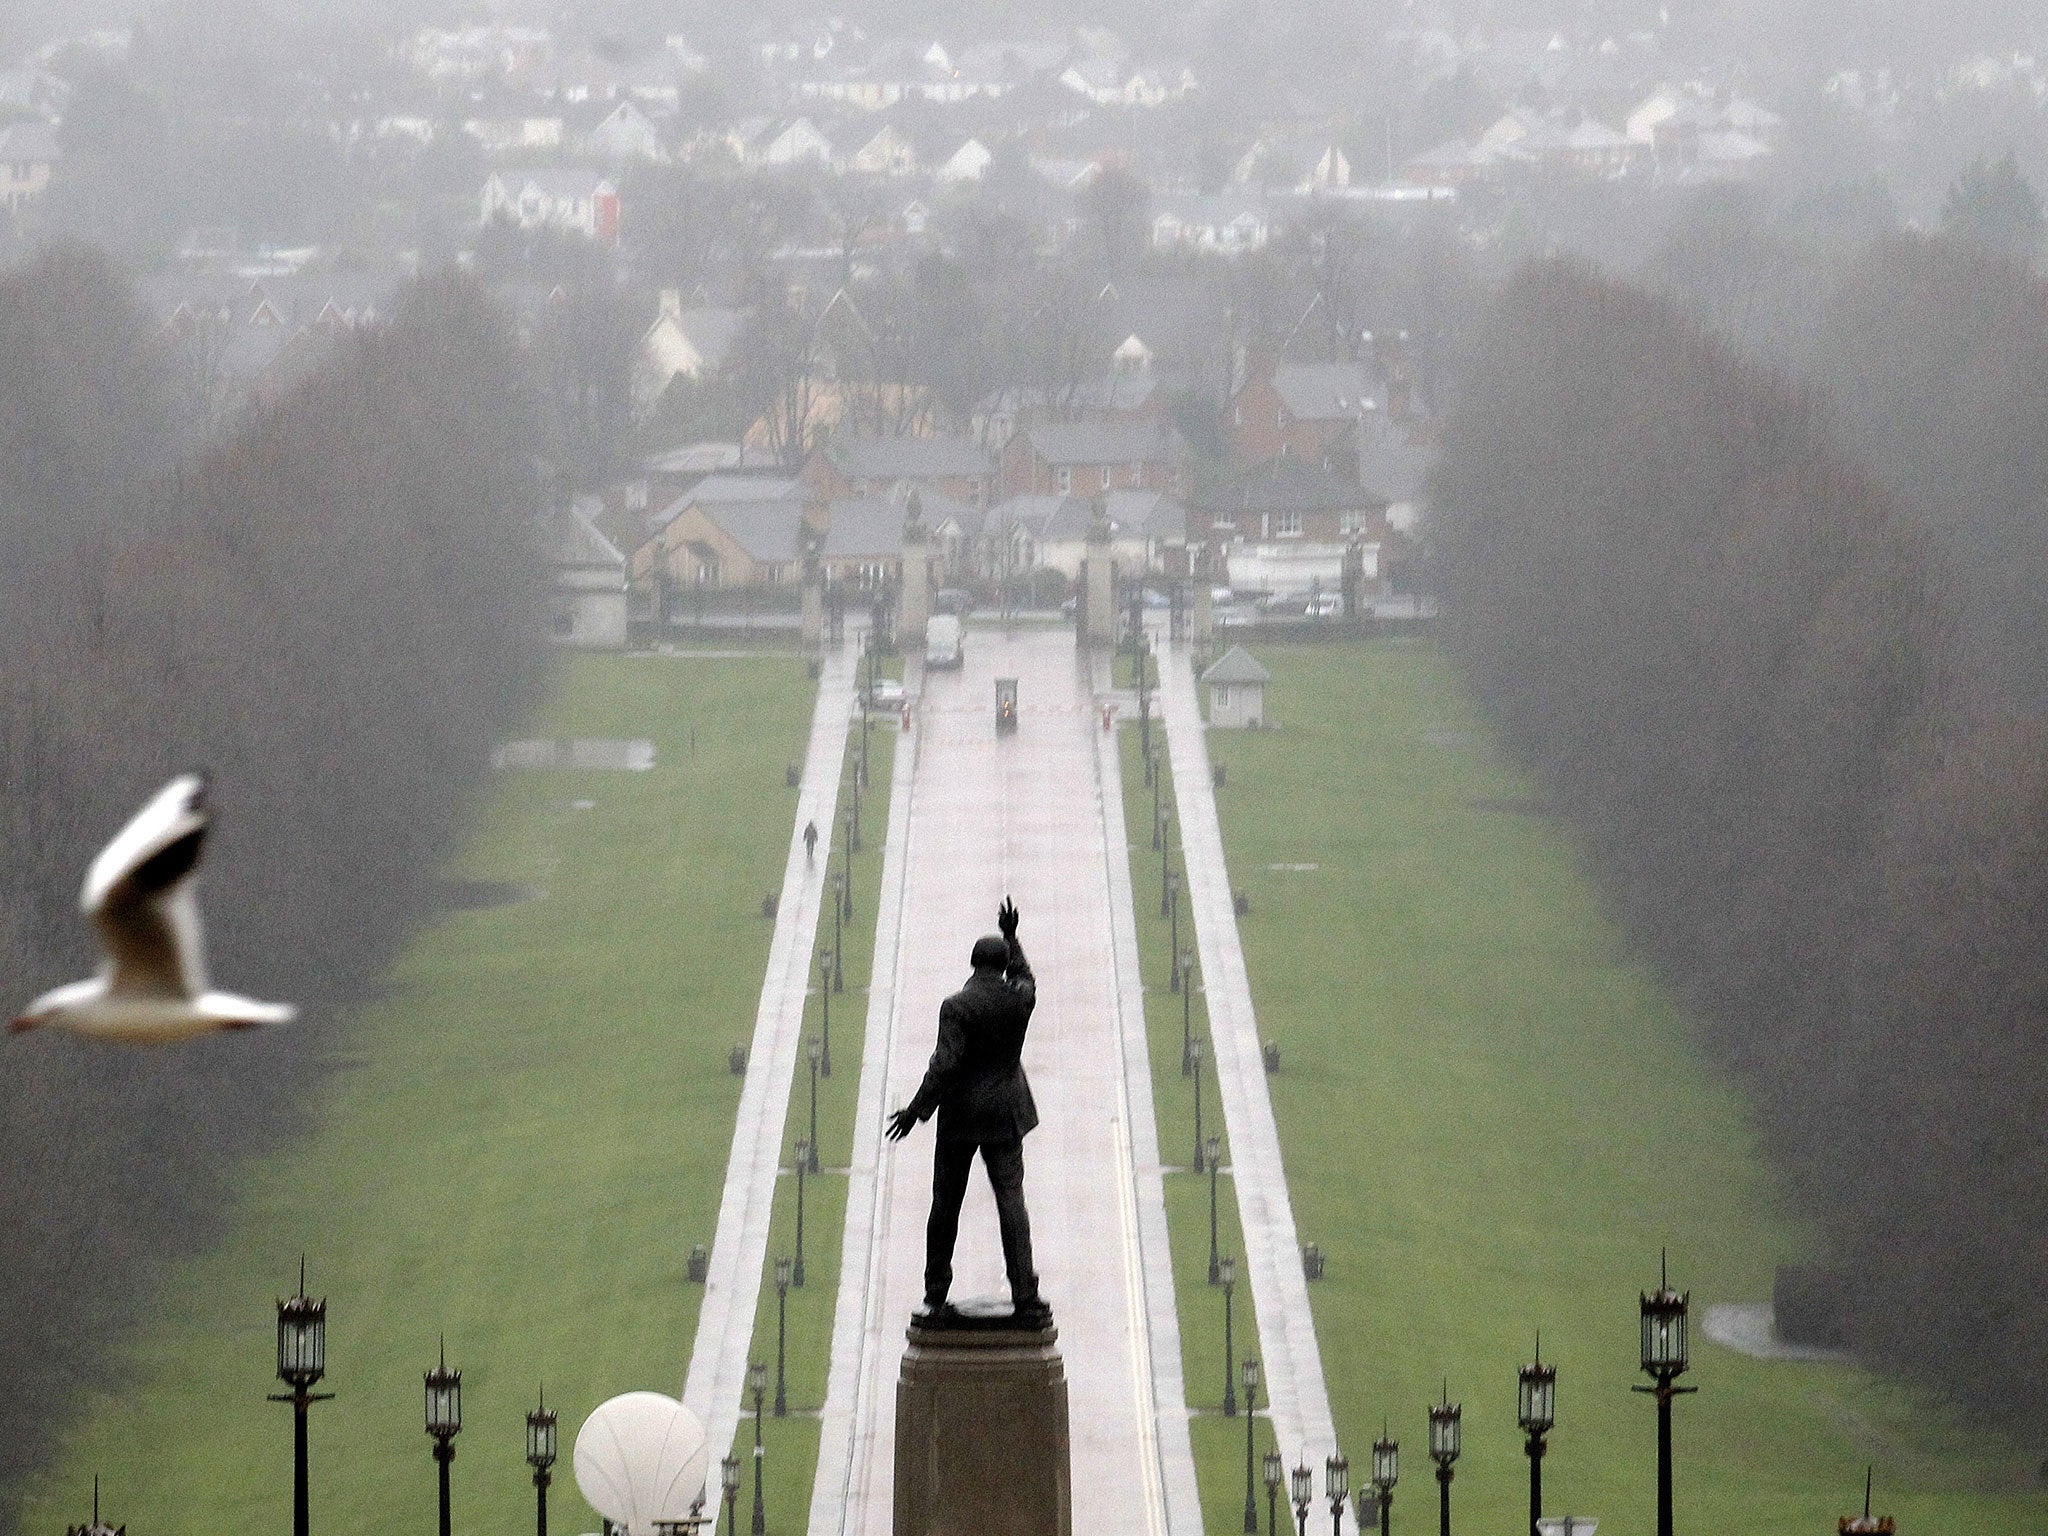 A statue of 1920's Ulster Unionist politician Edward Carson overlooks the grounds of Stormont estate, near Belfast Tuesday